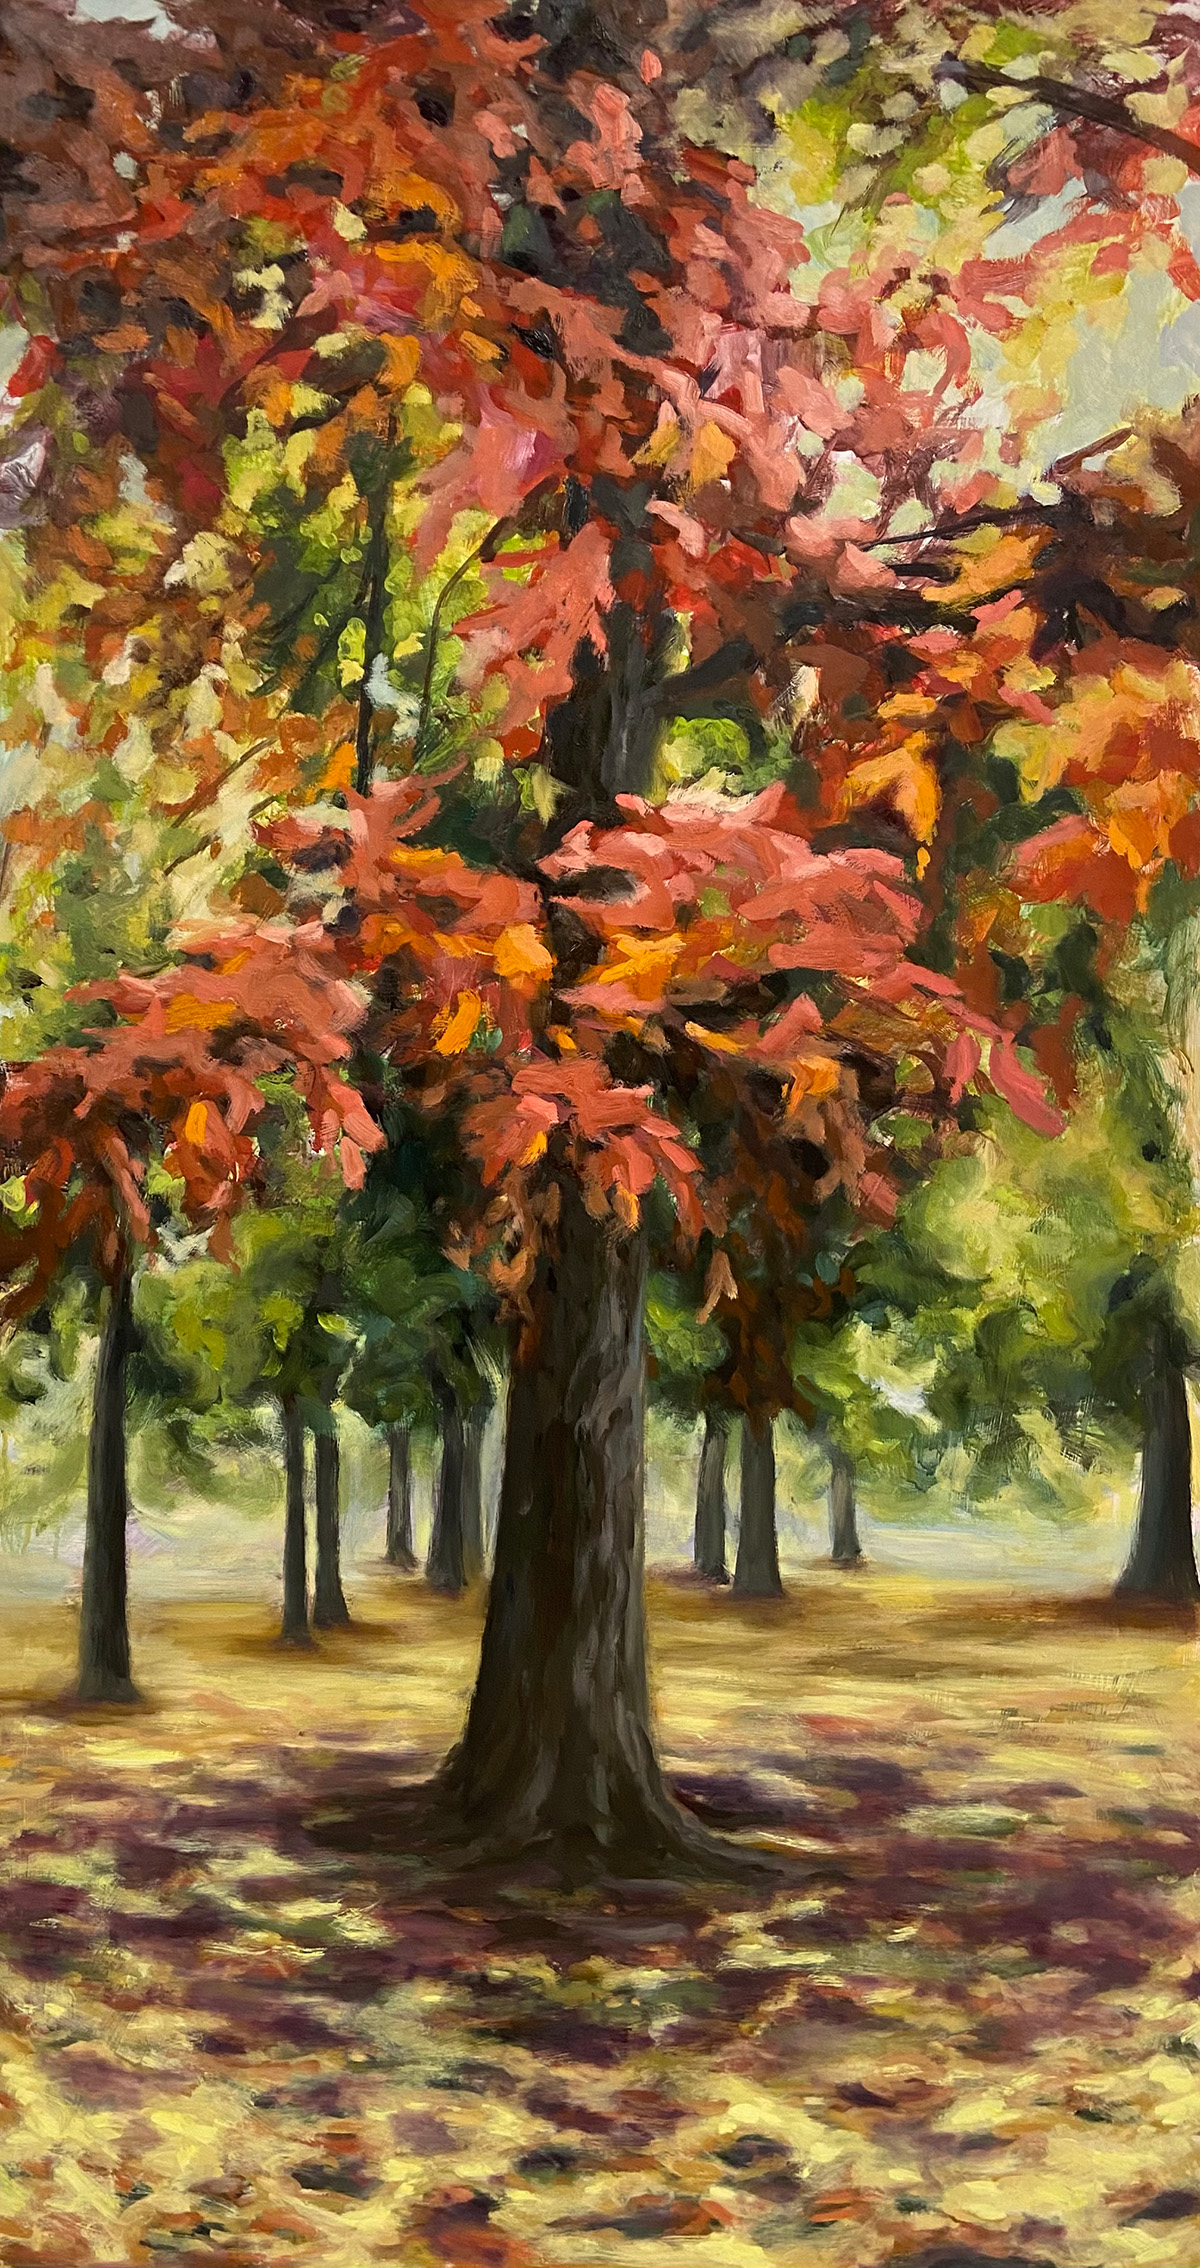 Painting of trees with red leaves in front and green in back.